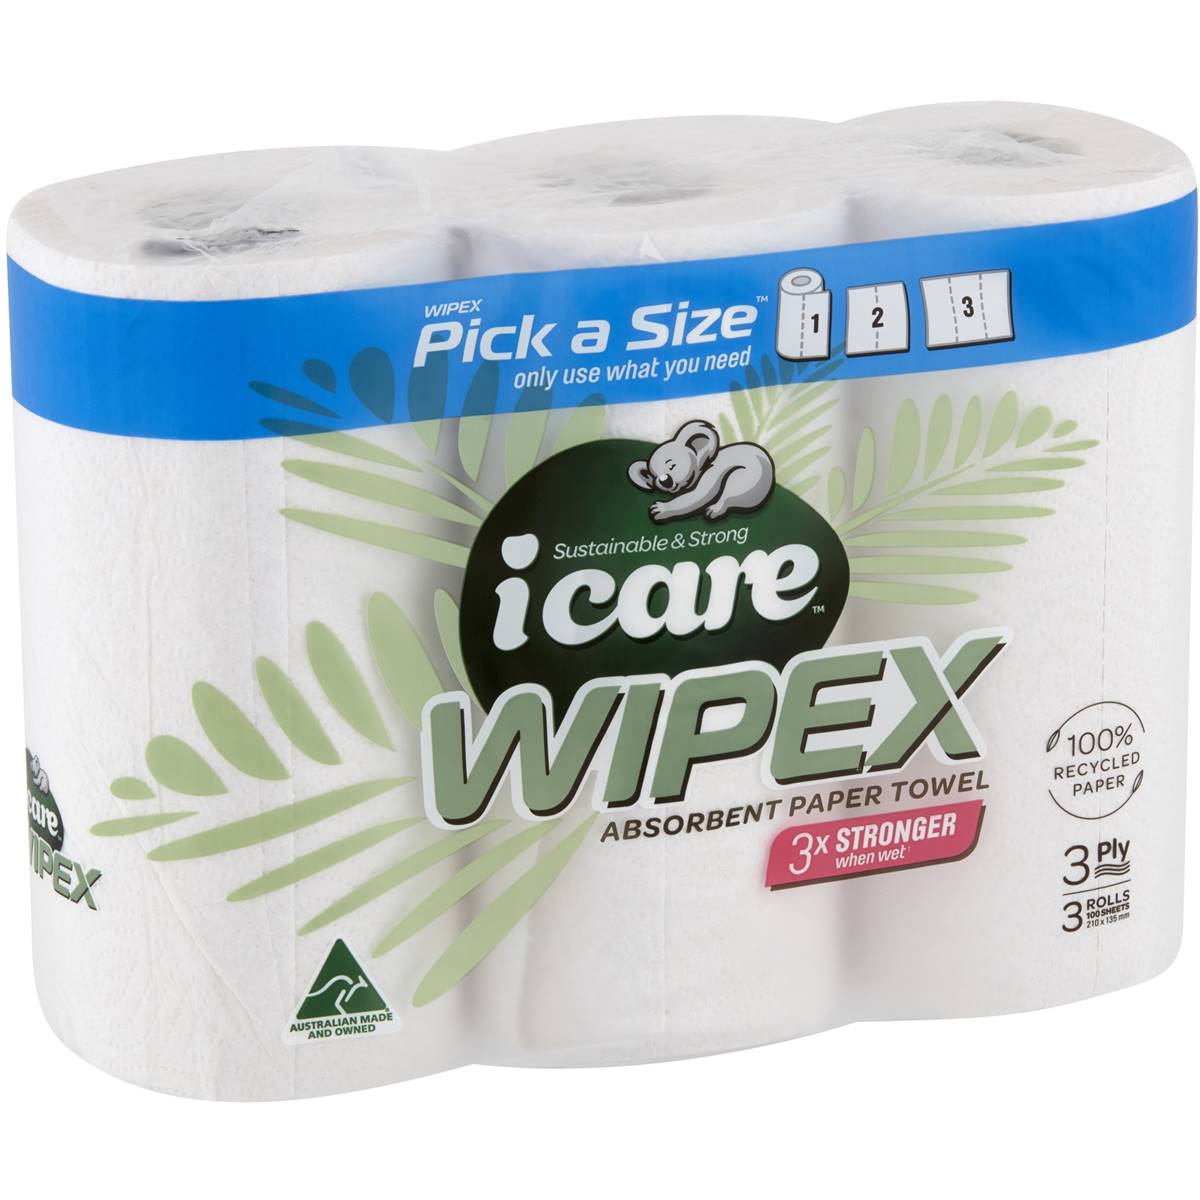 Icare Wipex Absorbent Recycled Paper Towel 3 Pack